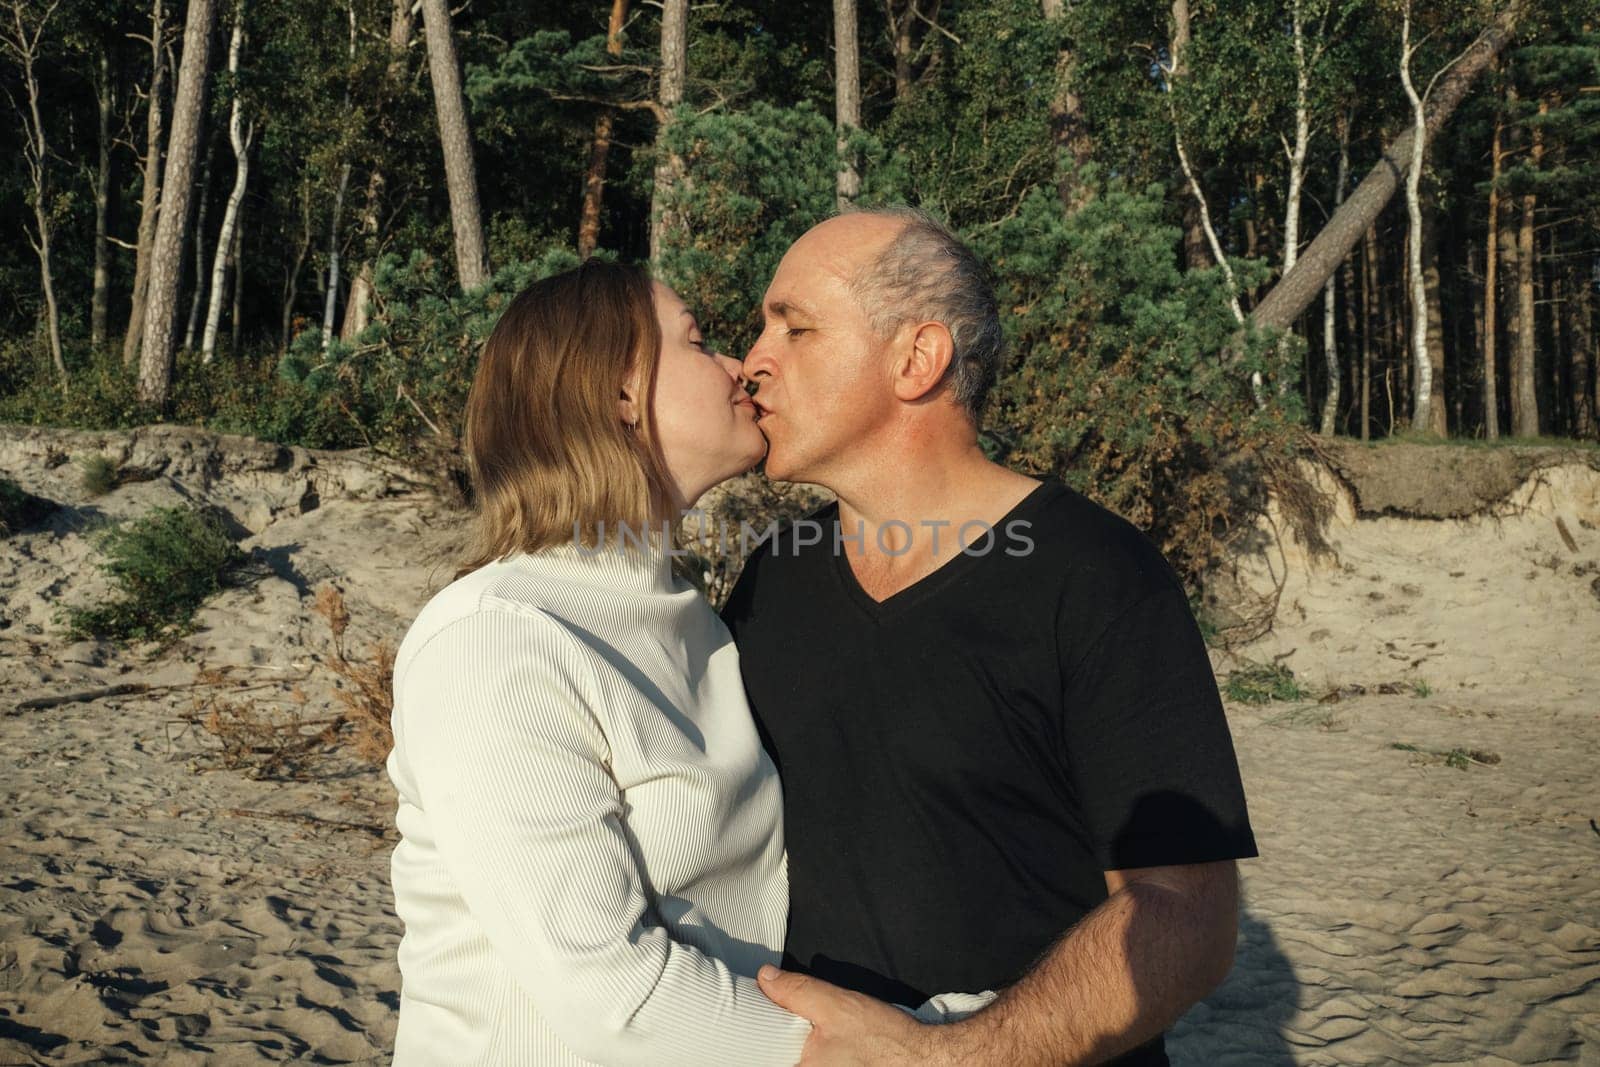 A man and a woman romantically kissing on the sandy beach with the ocean waves in the background.